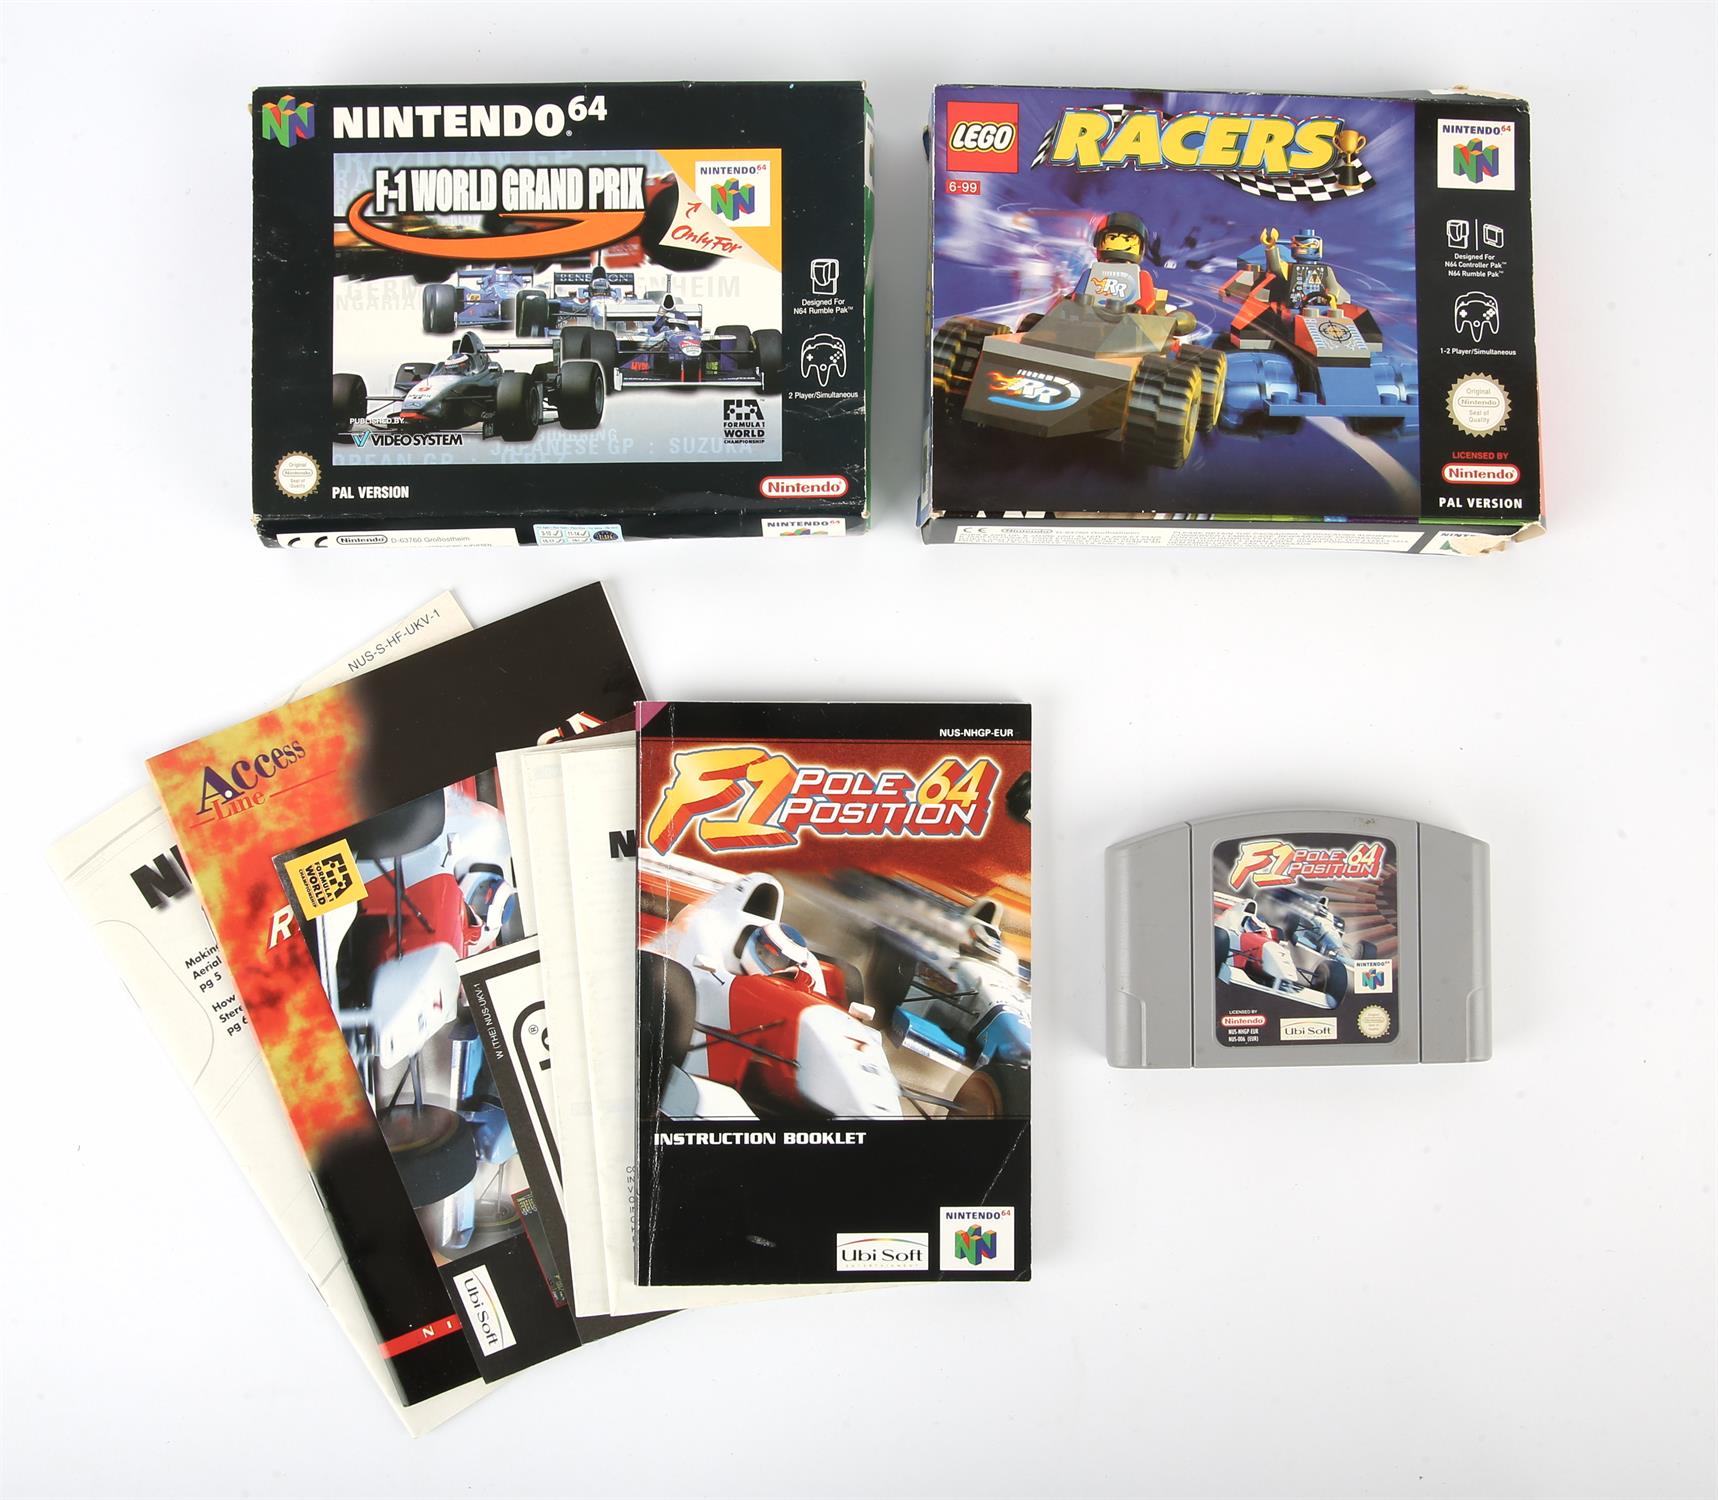 3 Nintendo 64 (N64) racing games (PAL) Includes: Lego Racers (including poster),